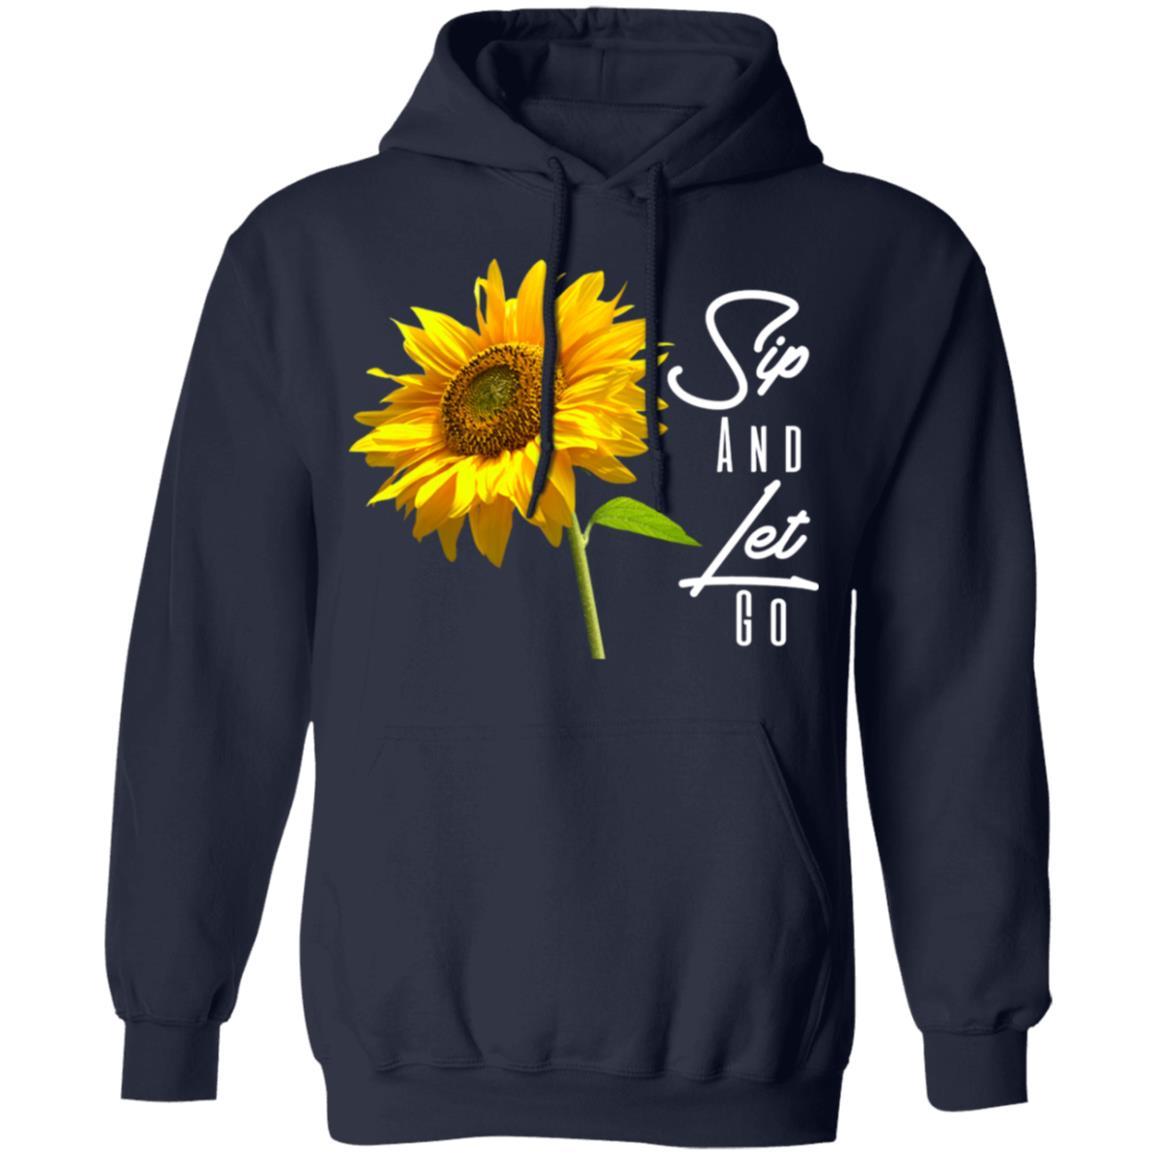 Sip And Let Go Pullover Hoodie Navy Blue - Loyalty Vibes